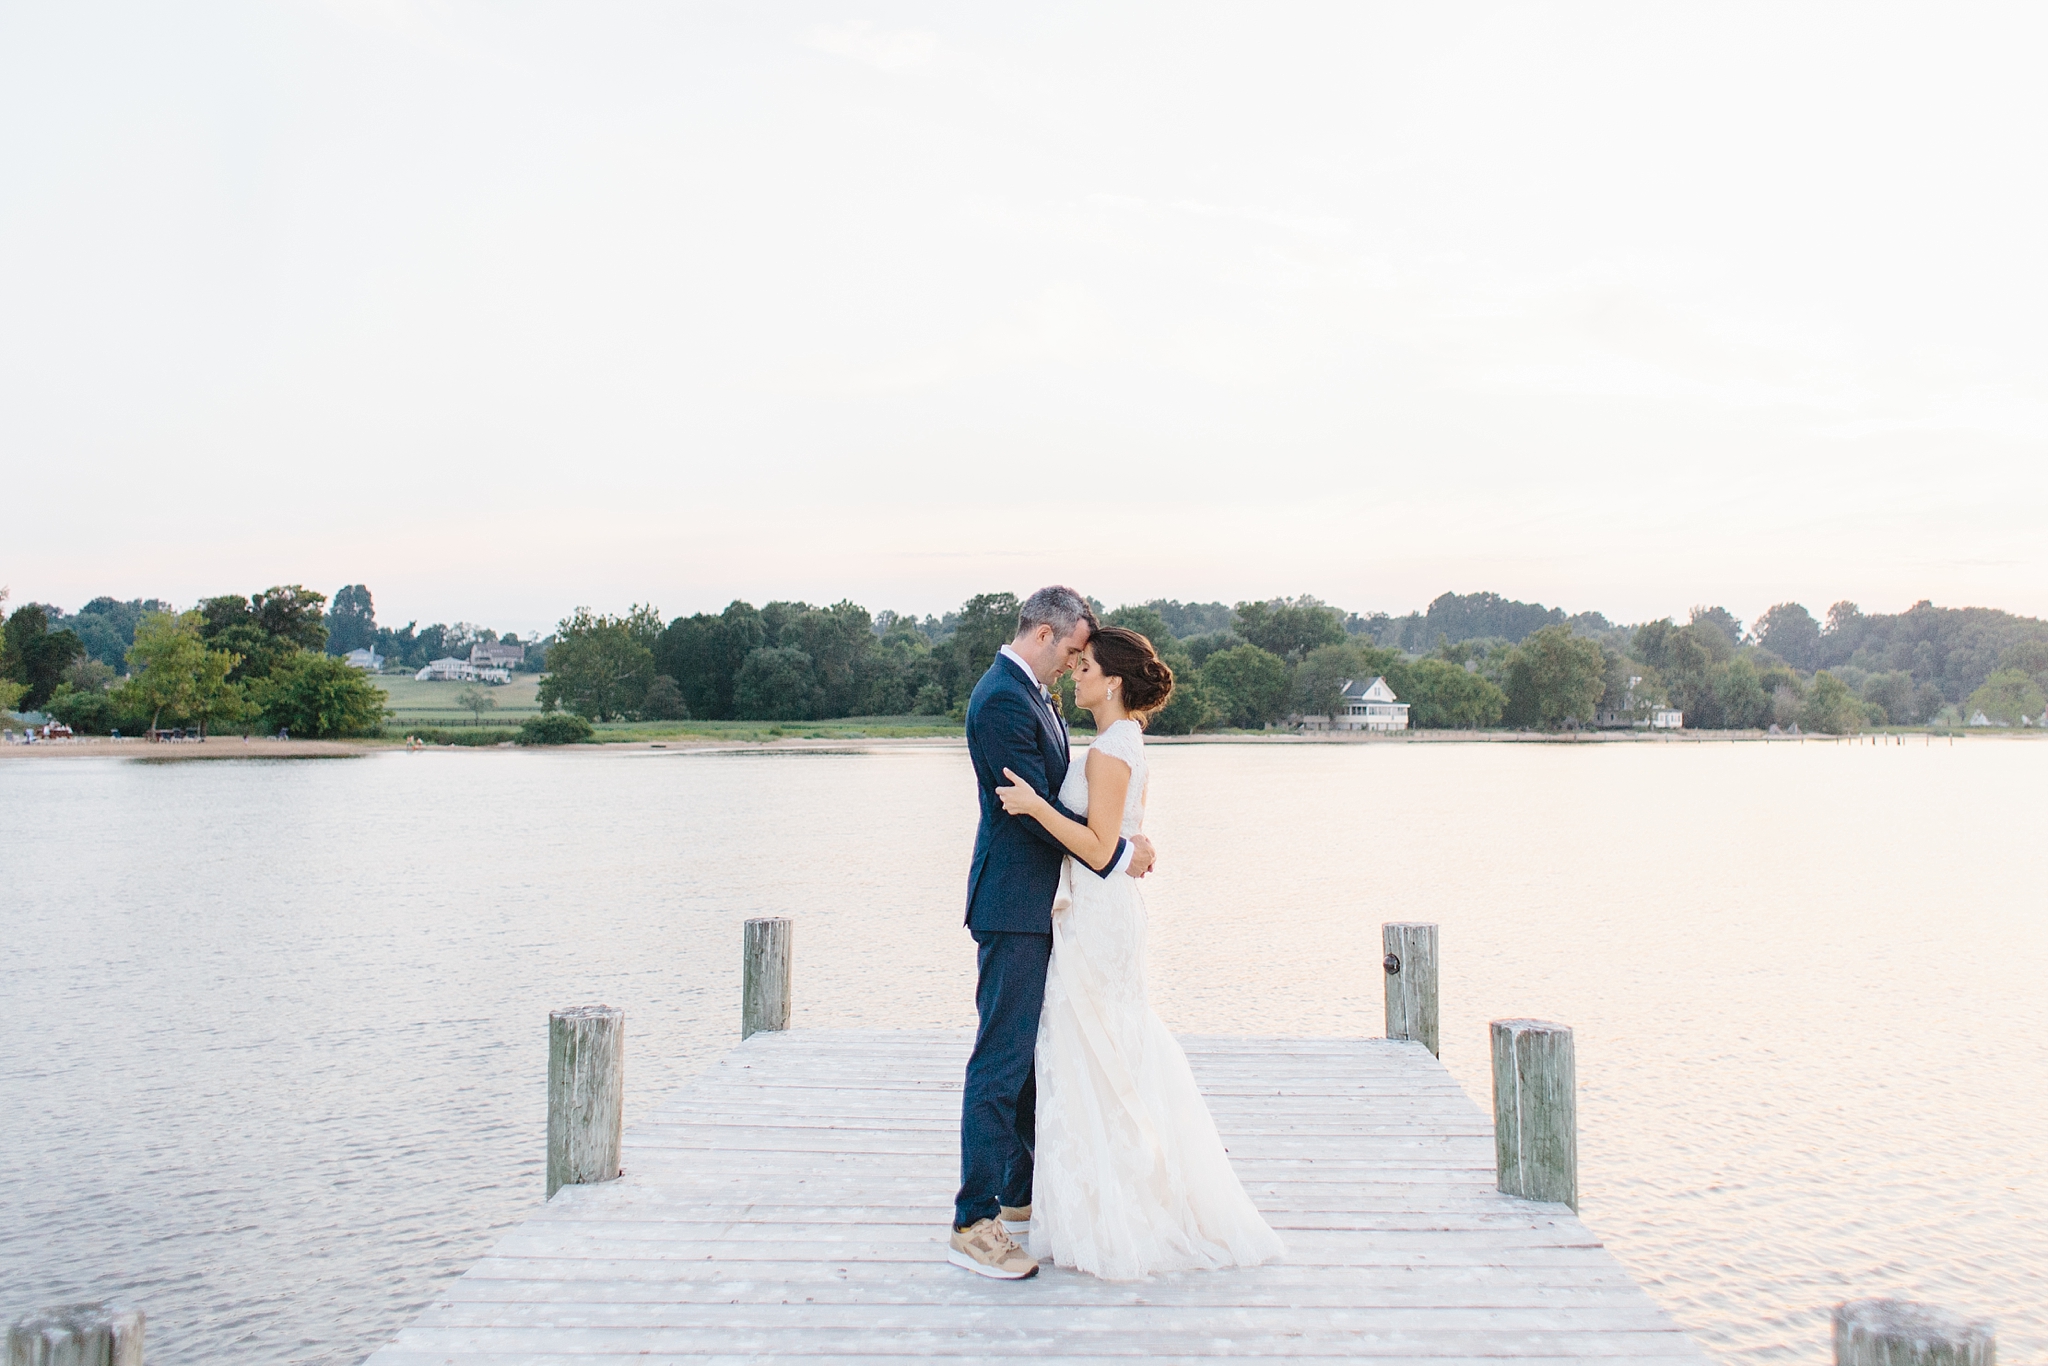 A nautical, summer wedding at Herrington on the Bay, in Chesapeake, MD -- photographed by Alicia Lacey Photography, a Washington DC wedding photographer.